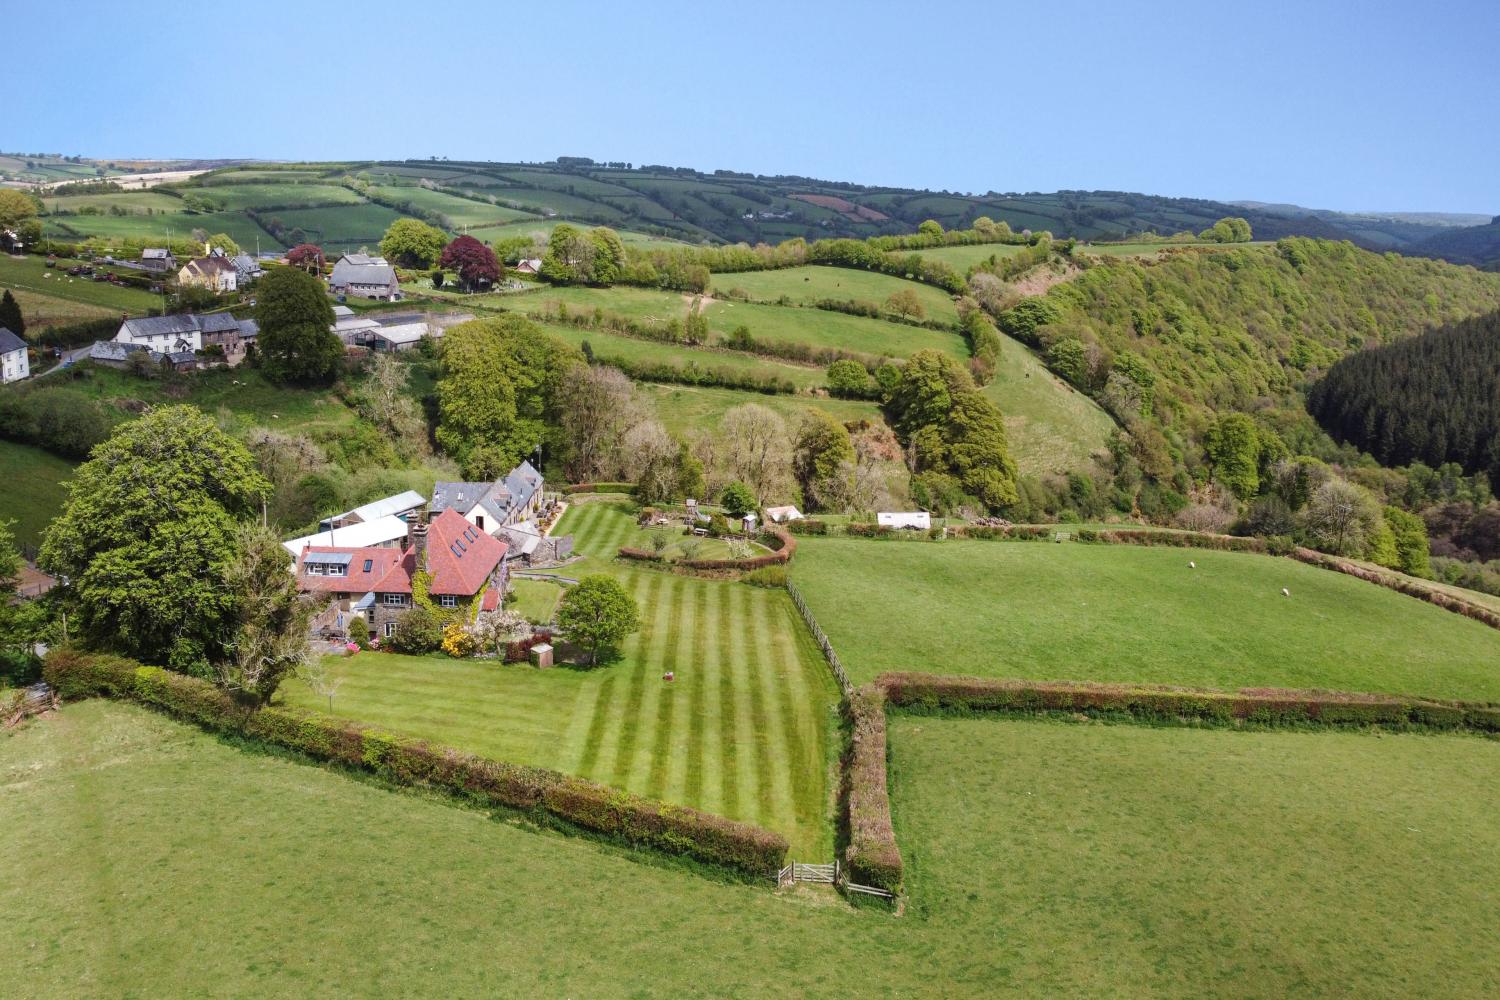 West Hollowcombe Farm & Cottages from above